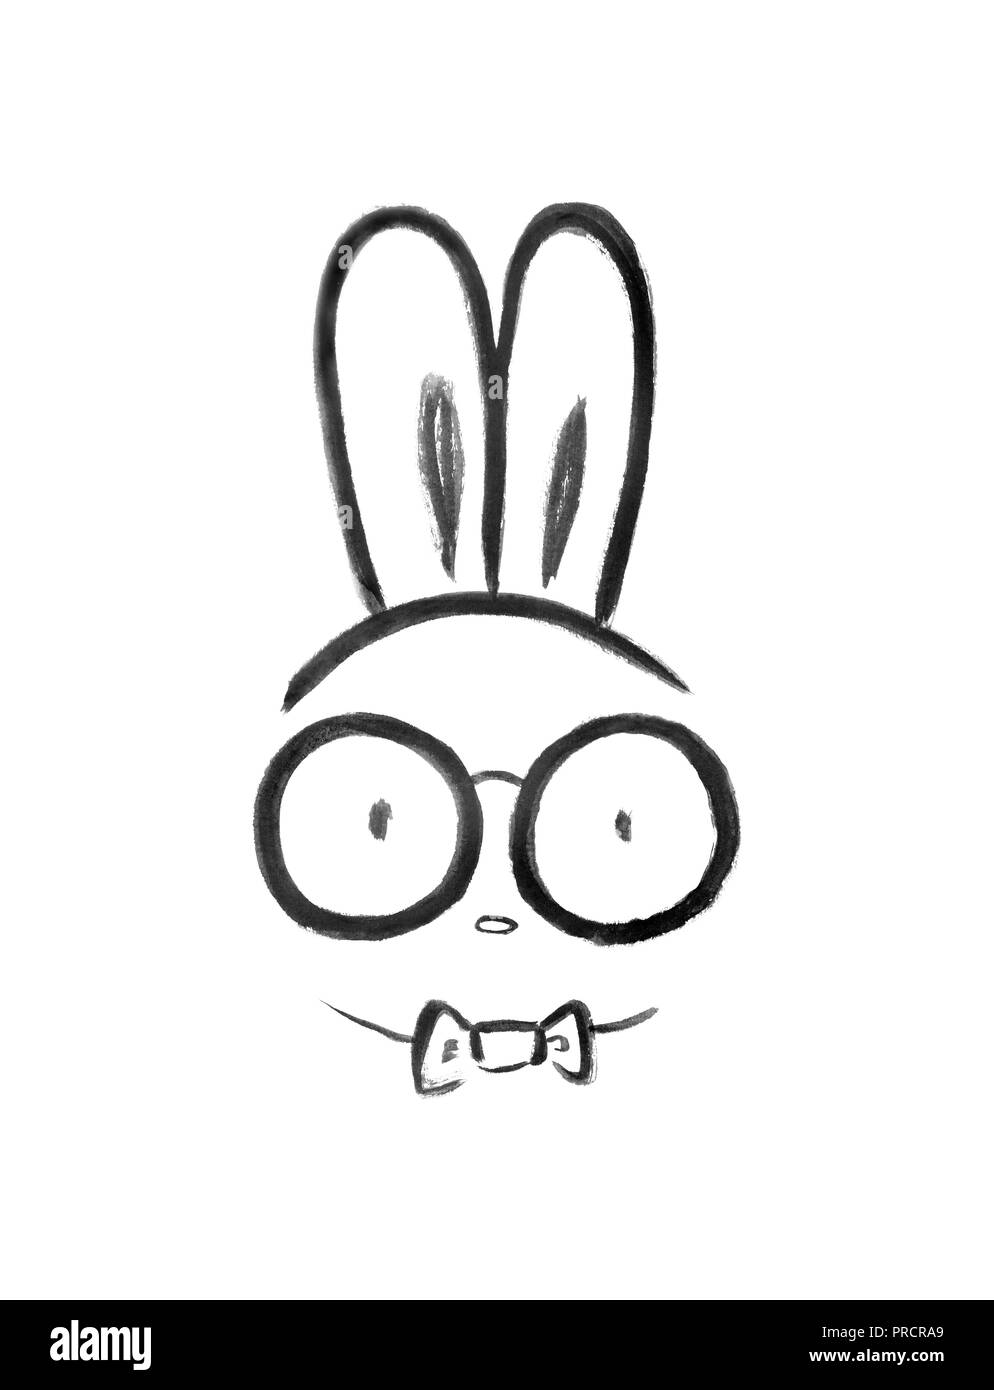 Cute nerd bunny wearing large nerdy glasses and a bow tie. Minimalistic oriental kawaii style black and white illustration, Japanese Sumi-e artwork is Stock Photo